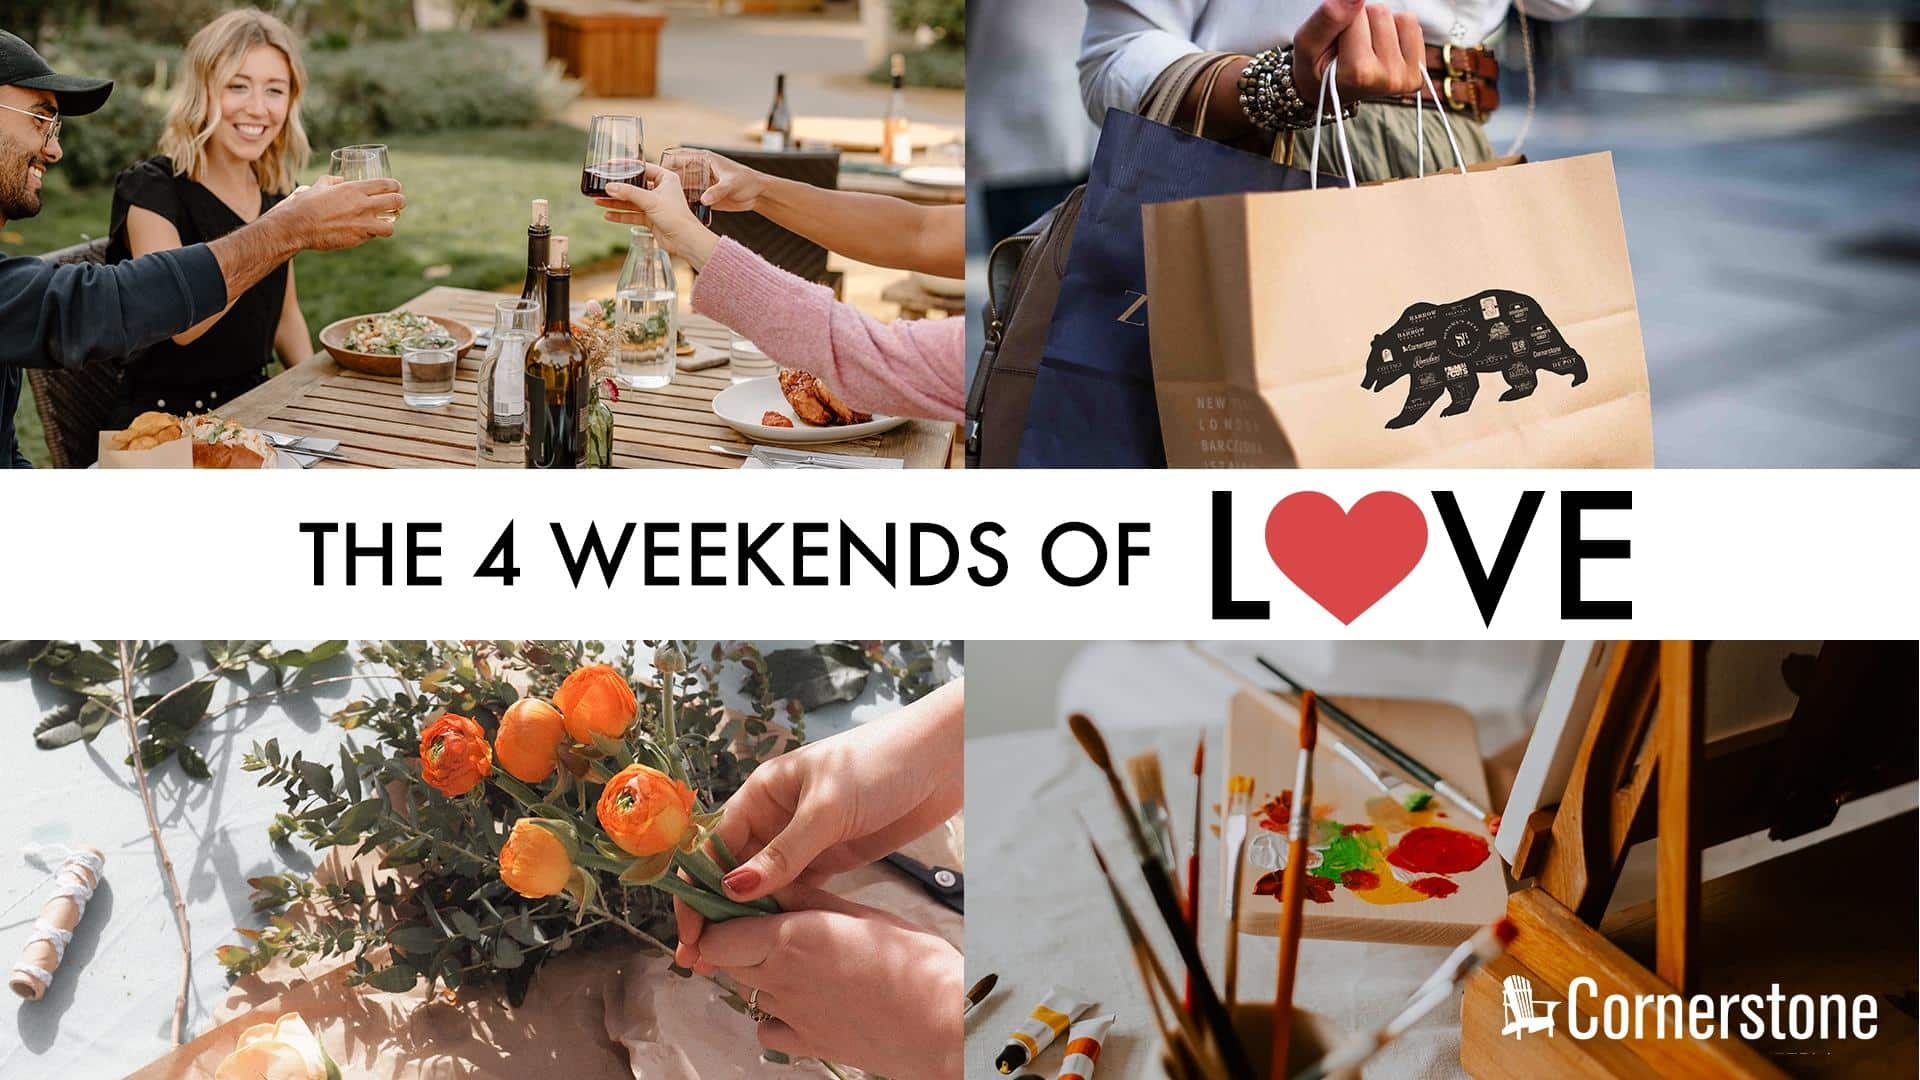 THE 4 WEEKENDS OF LOVE – For the Love of Shopping